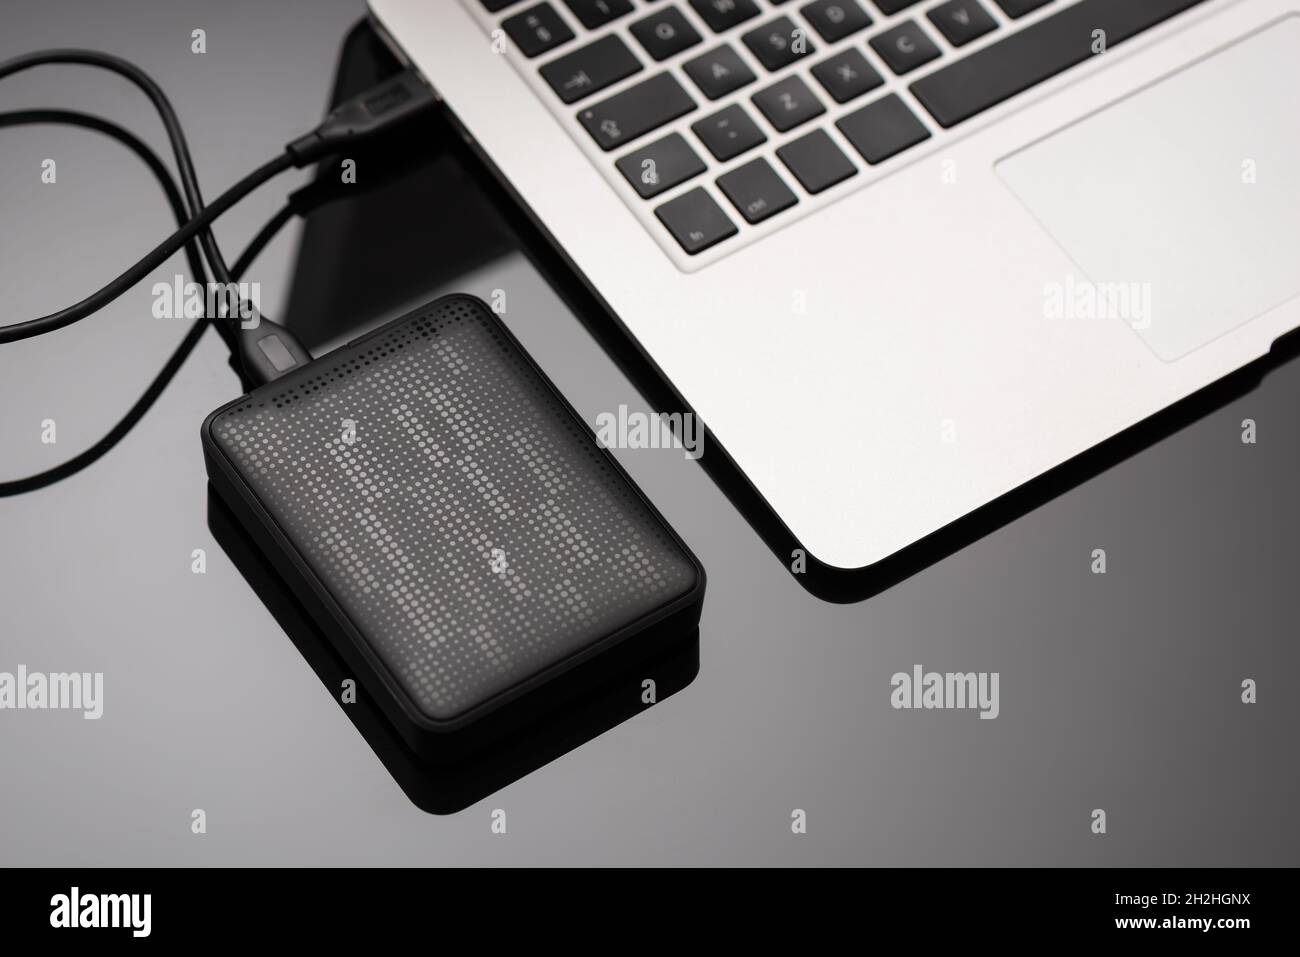 External backup disk hard drive connected to laptop Stock Photo